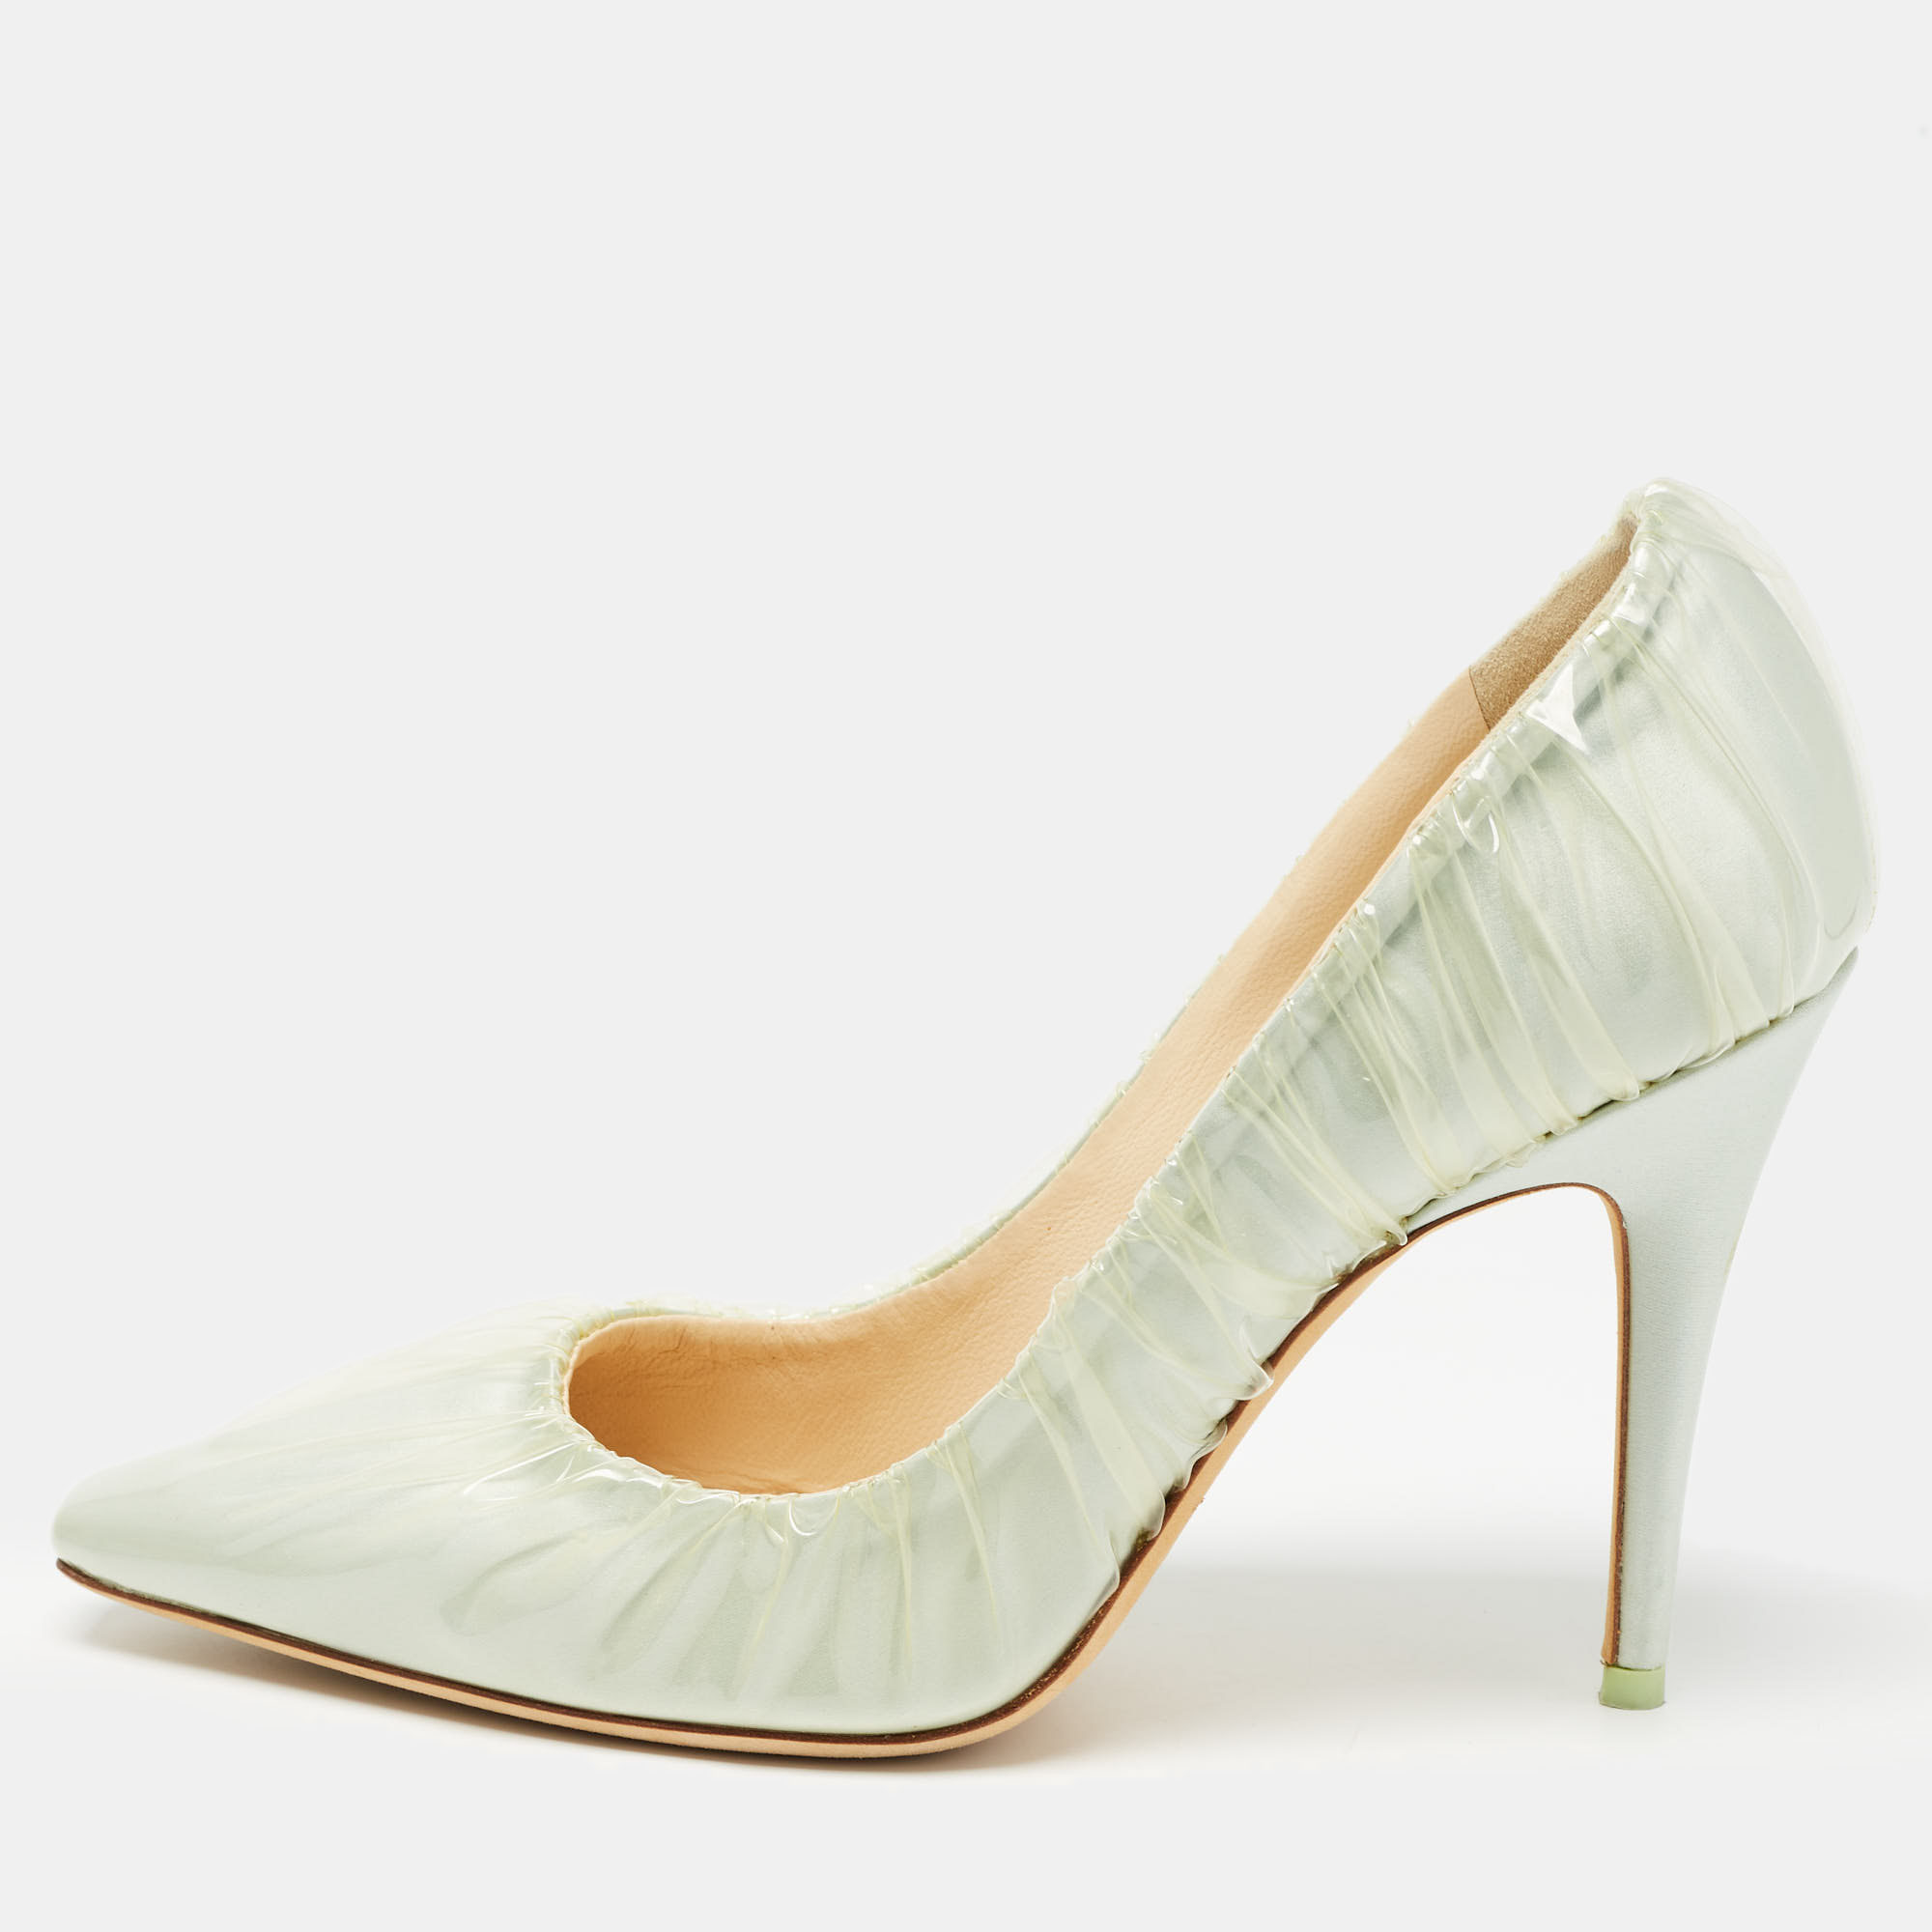 

Jimmy Choo x Off-White Light Blue Satin and Pleated PVC Anne Pumps Size